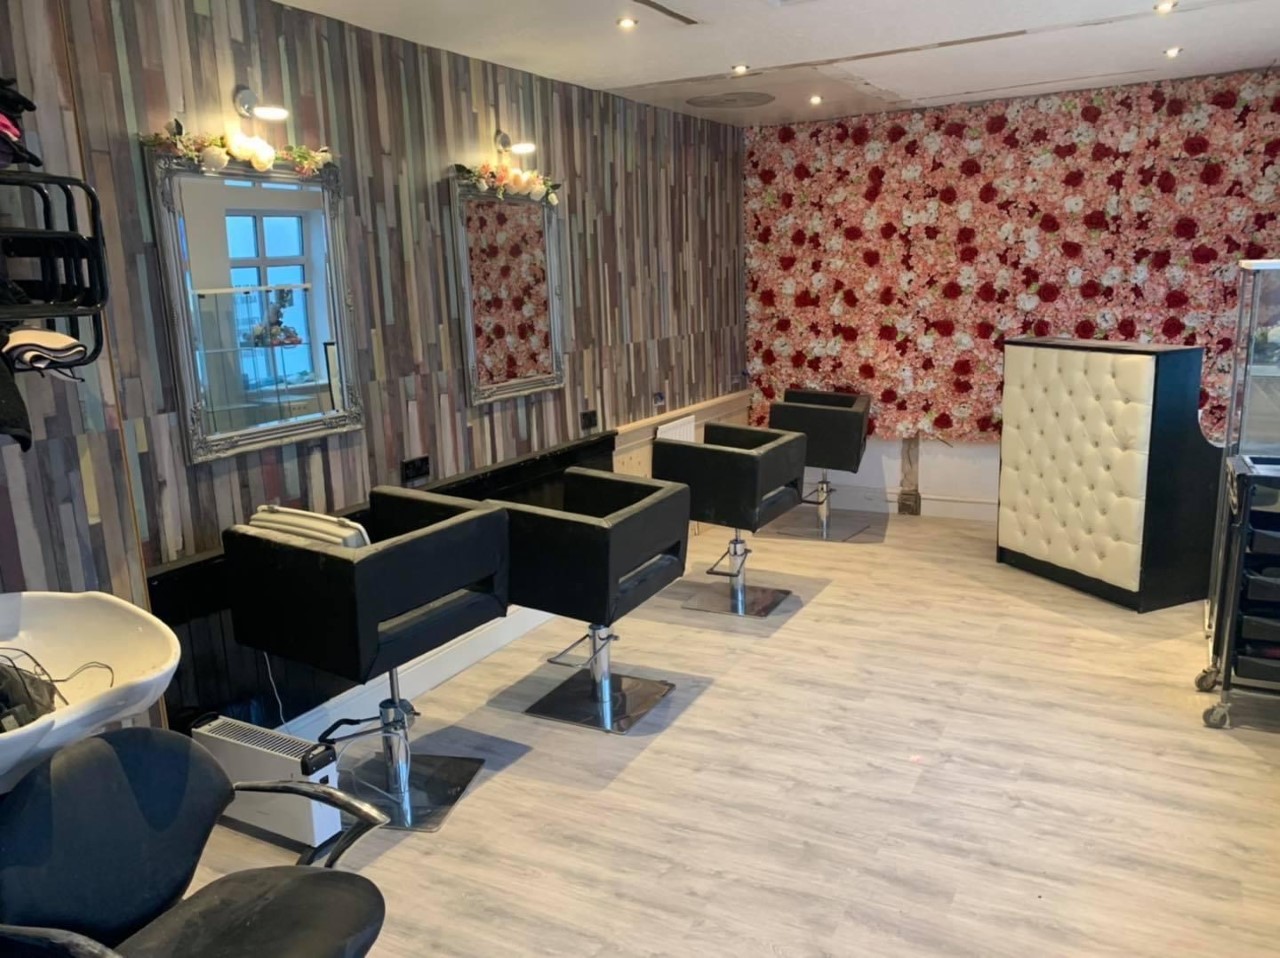 The salon has a homely feel and a warm welome